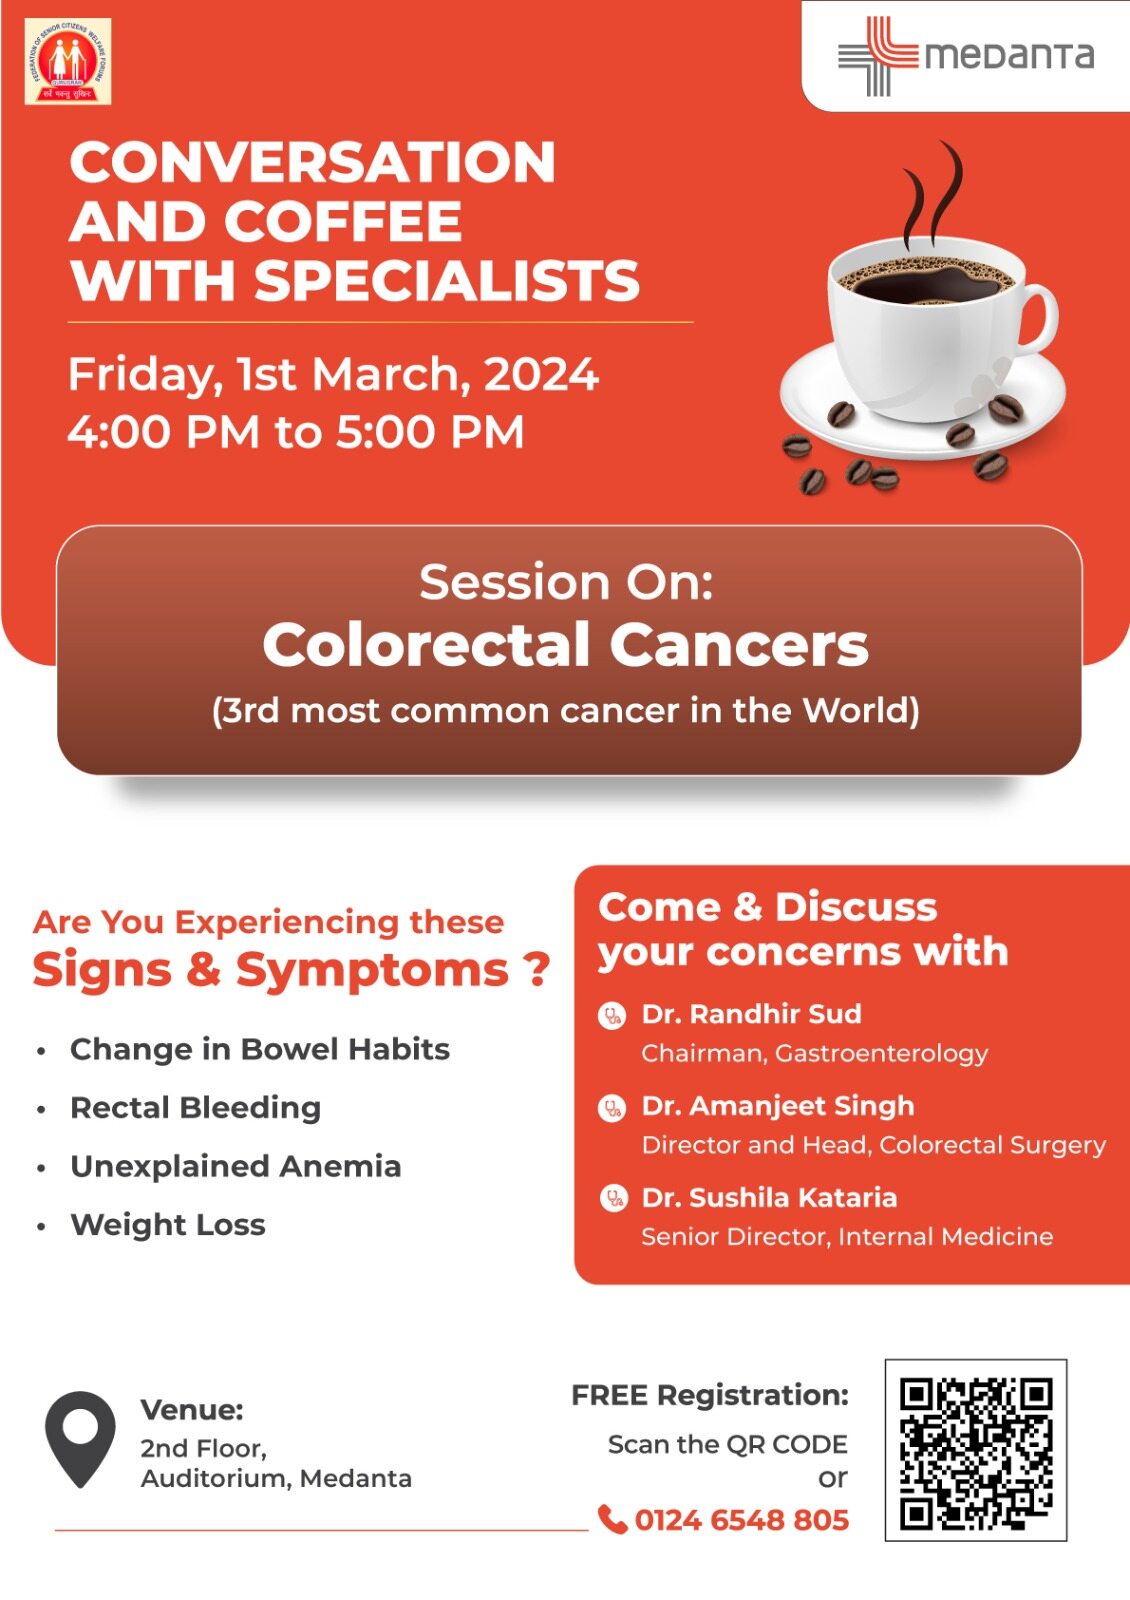 medanta-to-host-conversations-and-coffee-with-specialists-strengthening-awareness-around-colorectal-cancer